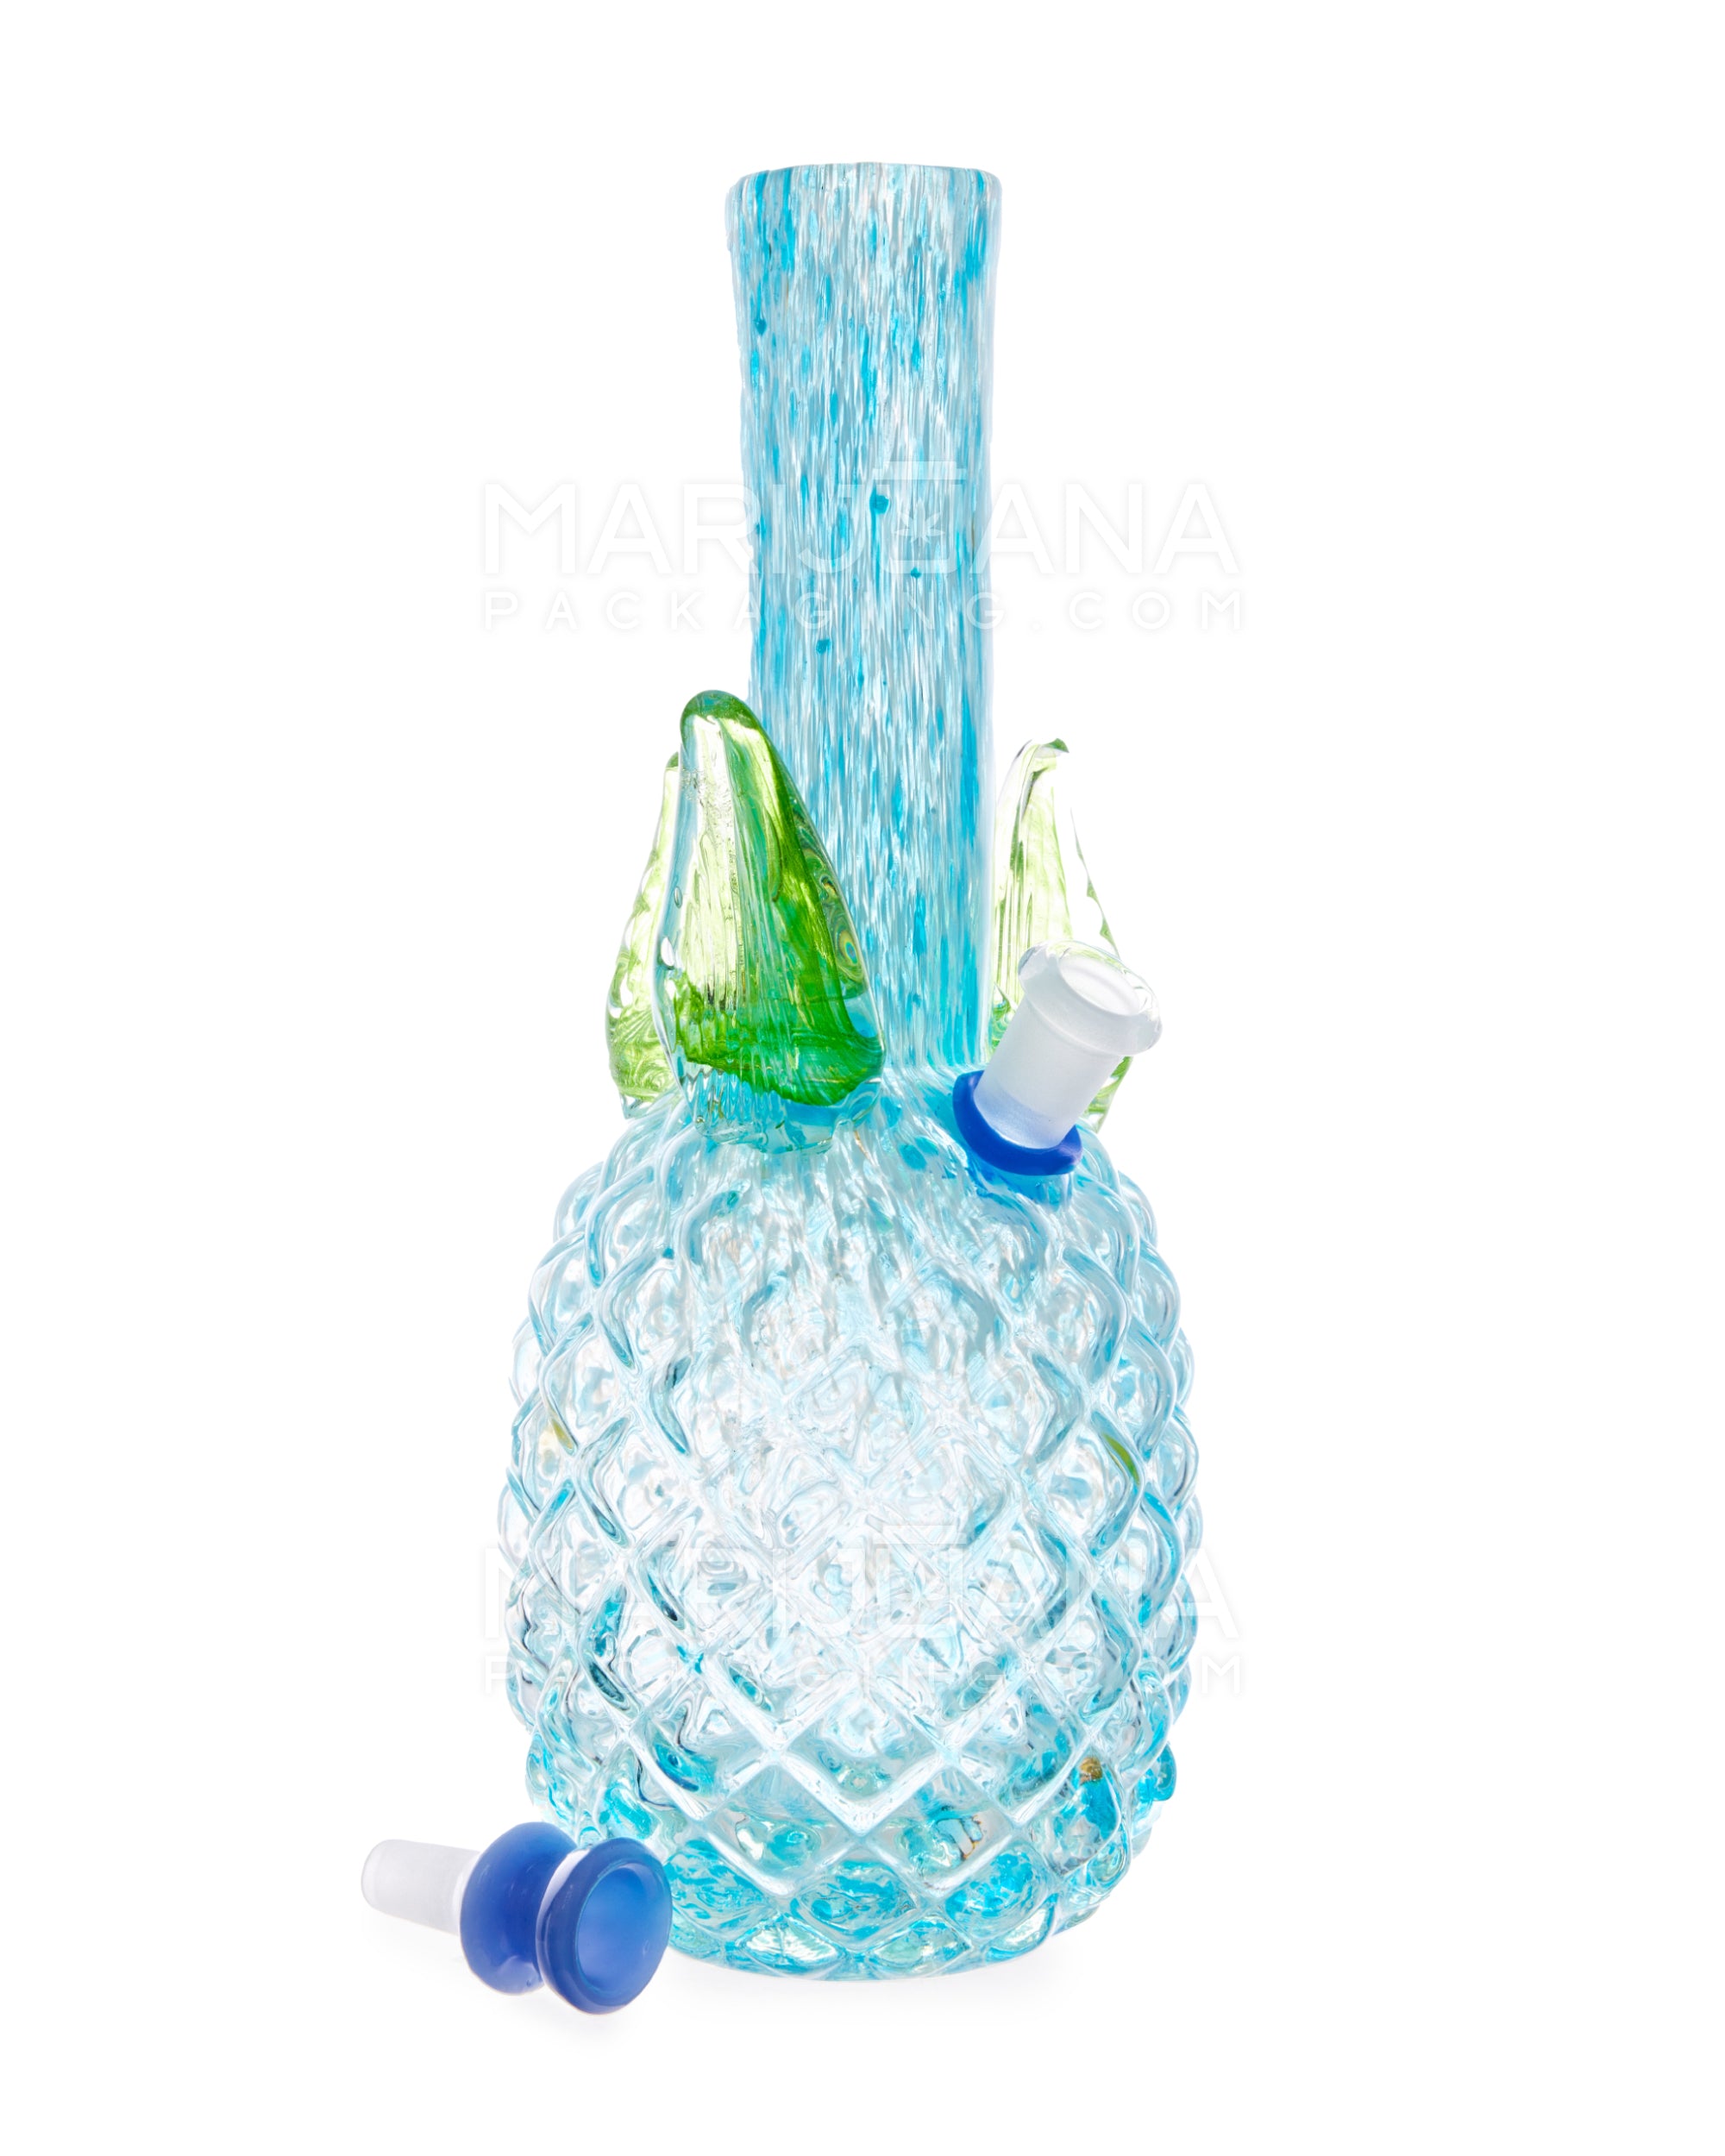 Straight Neck Color Pull Pineapple Glass Water Pipe | 12in Tall - 14mm Bowl - Blue - 2